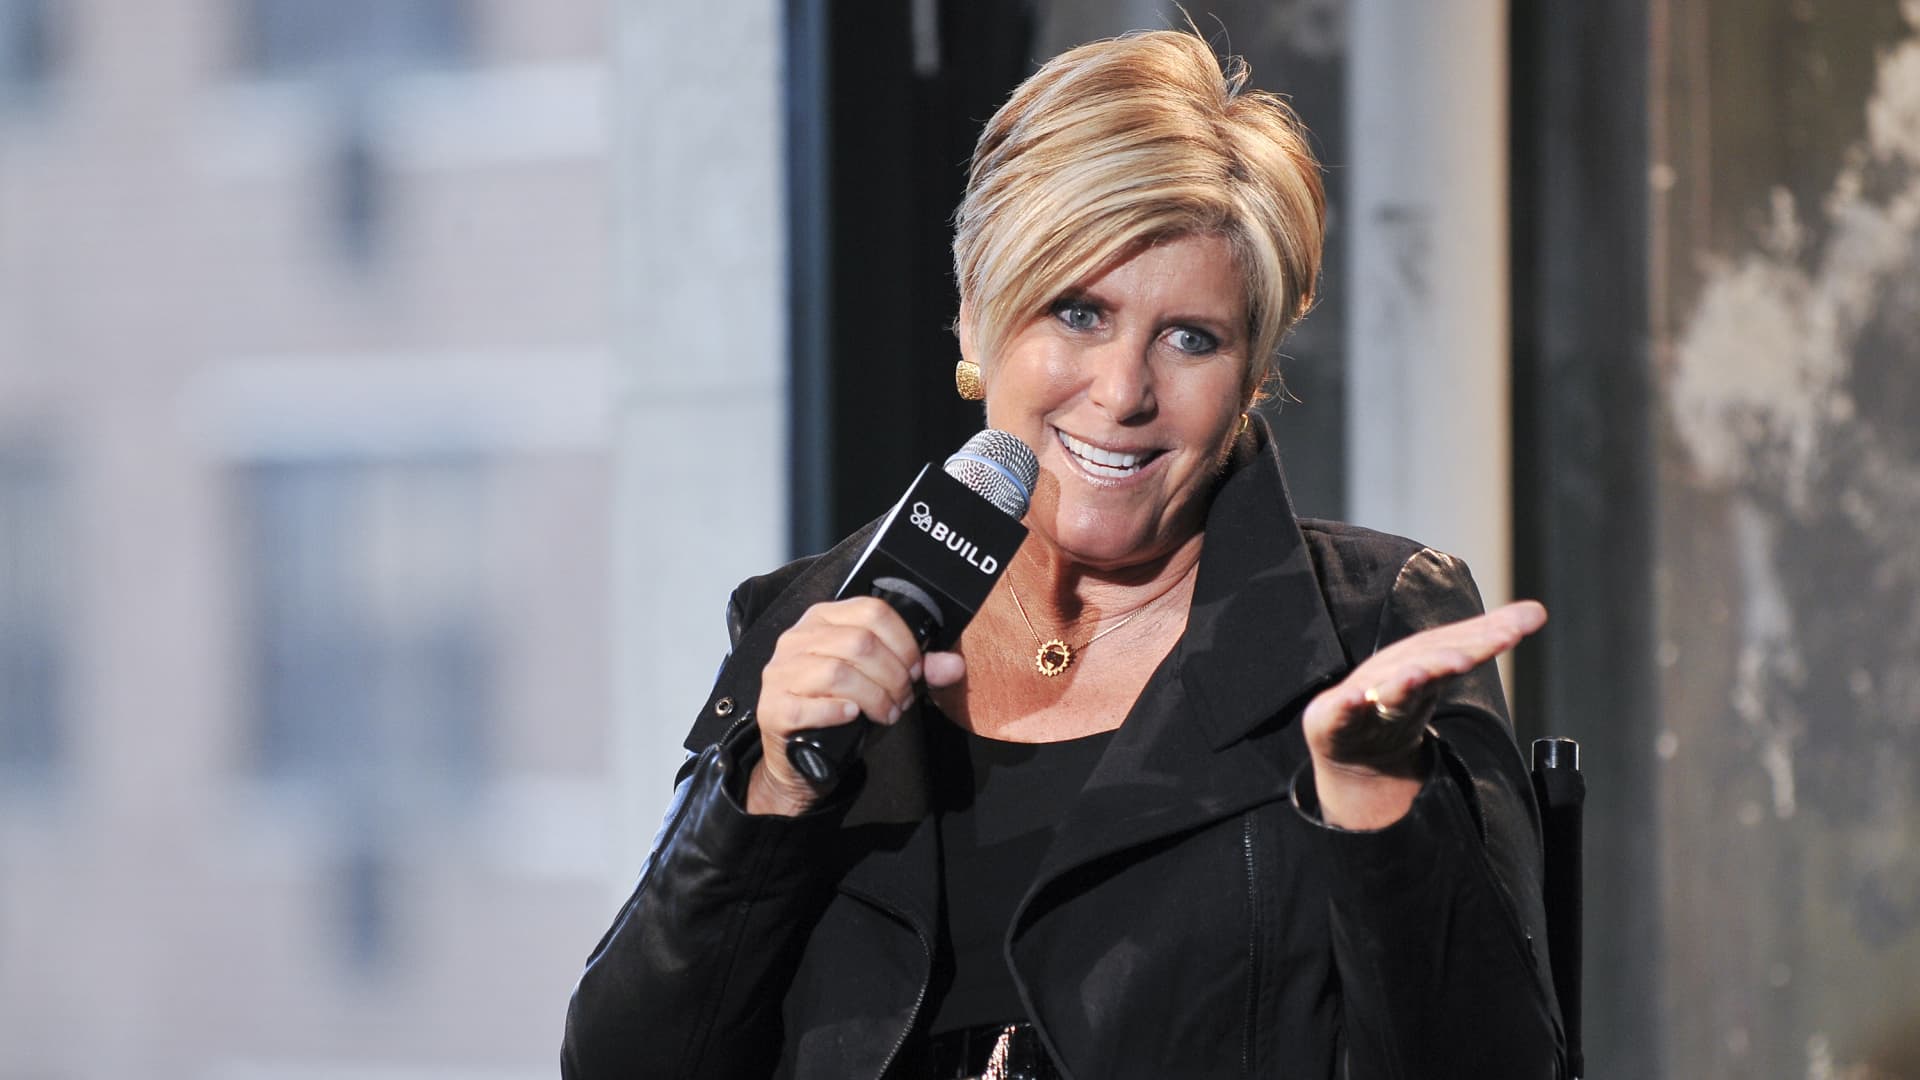 Suze Orman: ‘Big mistake if you park your money forever in bonds’